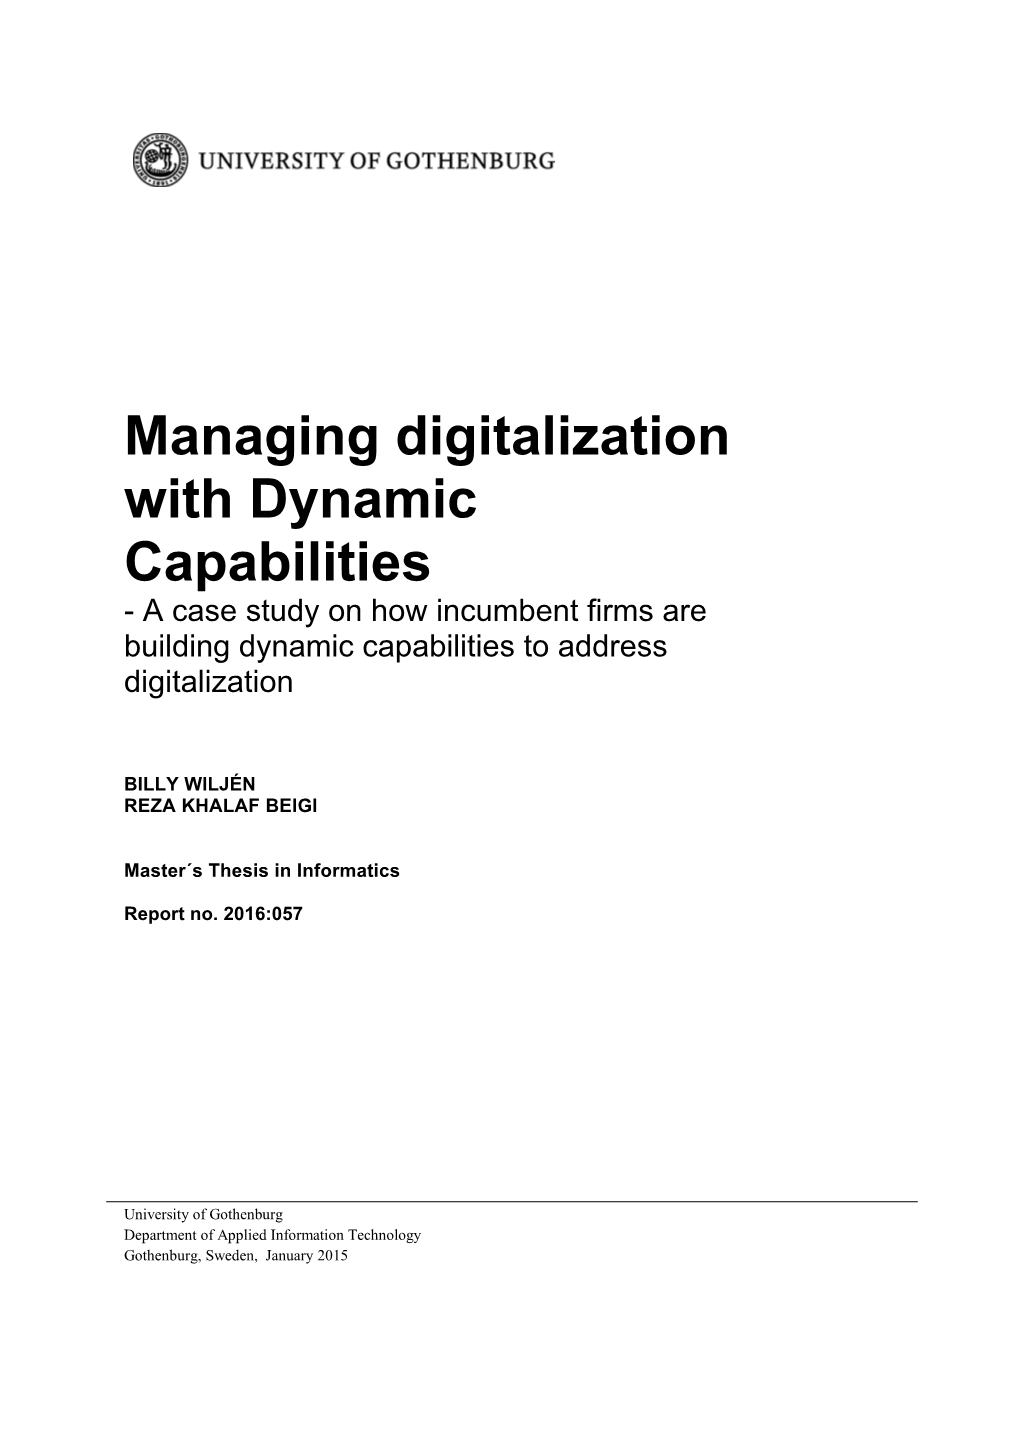 Managing Digitalization with Dynamic Capabilities - a Case Study on How Incumbent Firms Are Building Dynamic Capabilities to Address Digitalization